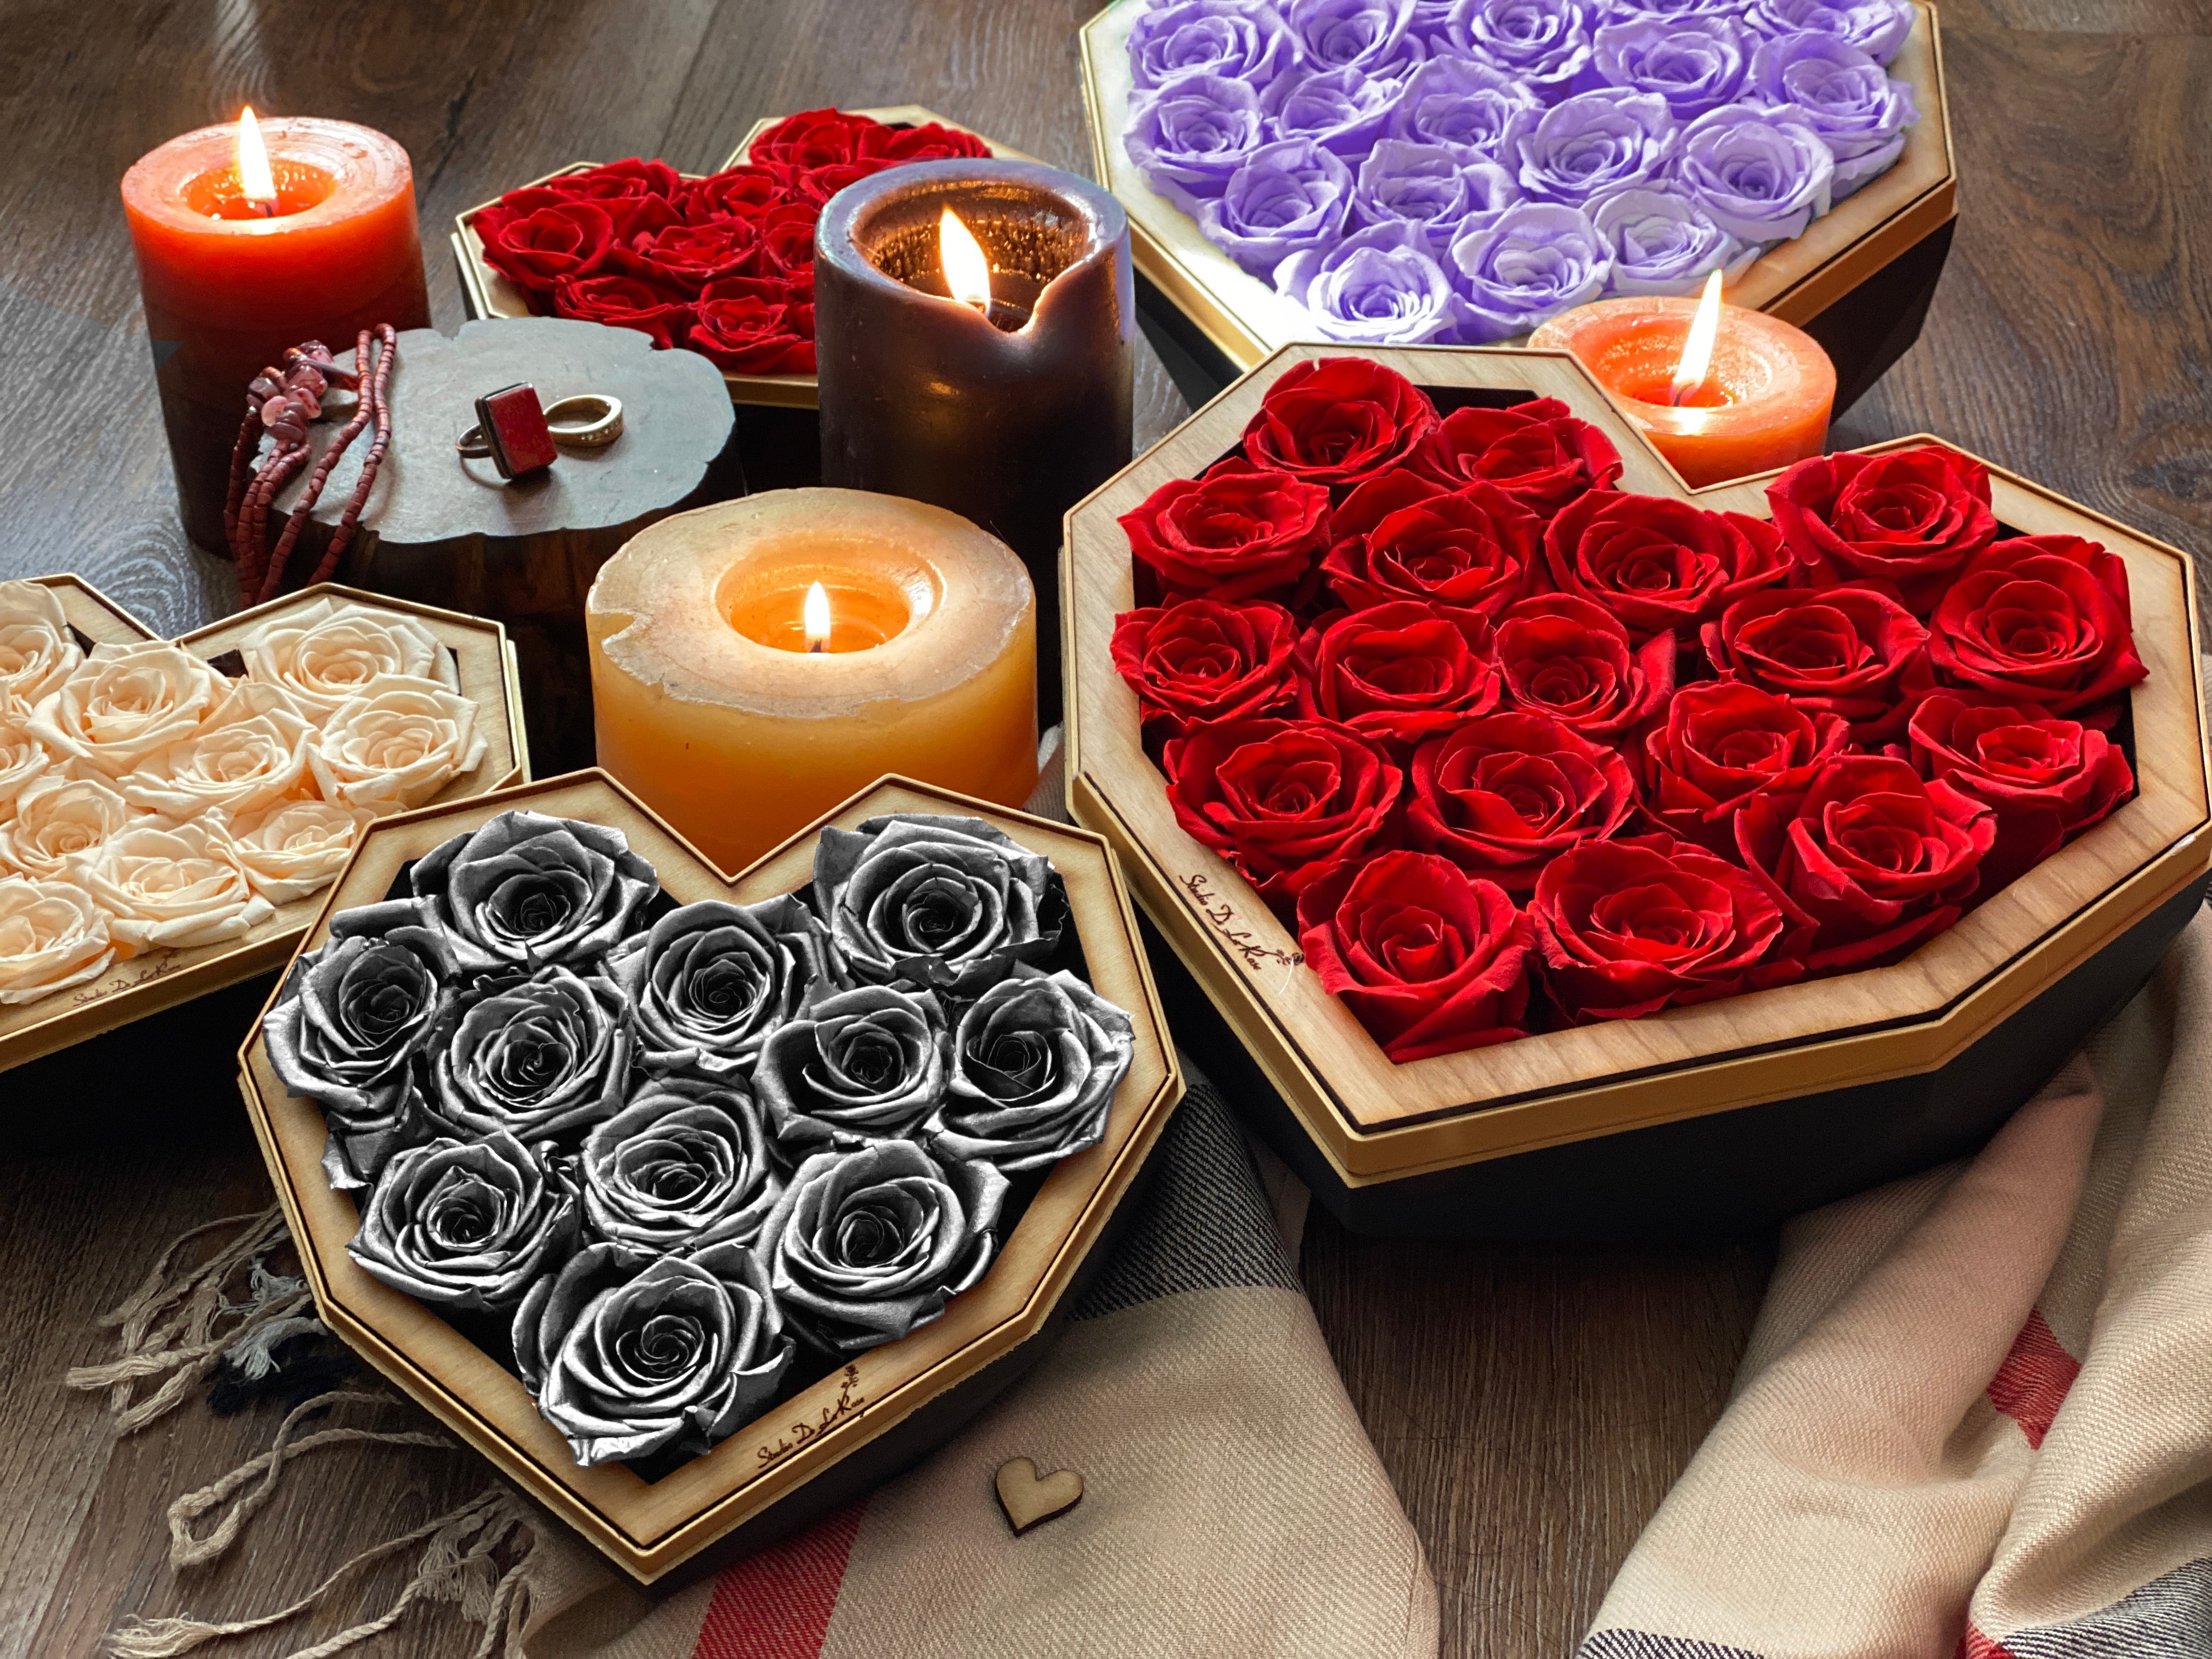 Deluxe Black Diamond Box Filled With The Ultimate Timeless Roses – Unleash Your Creativity